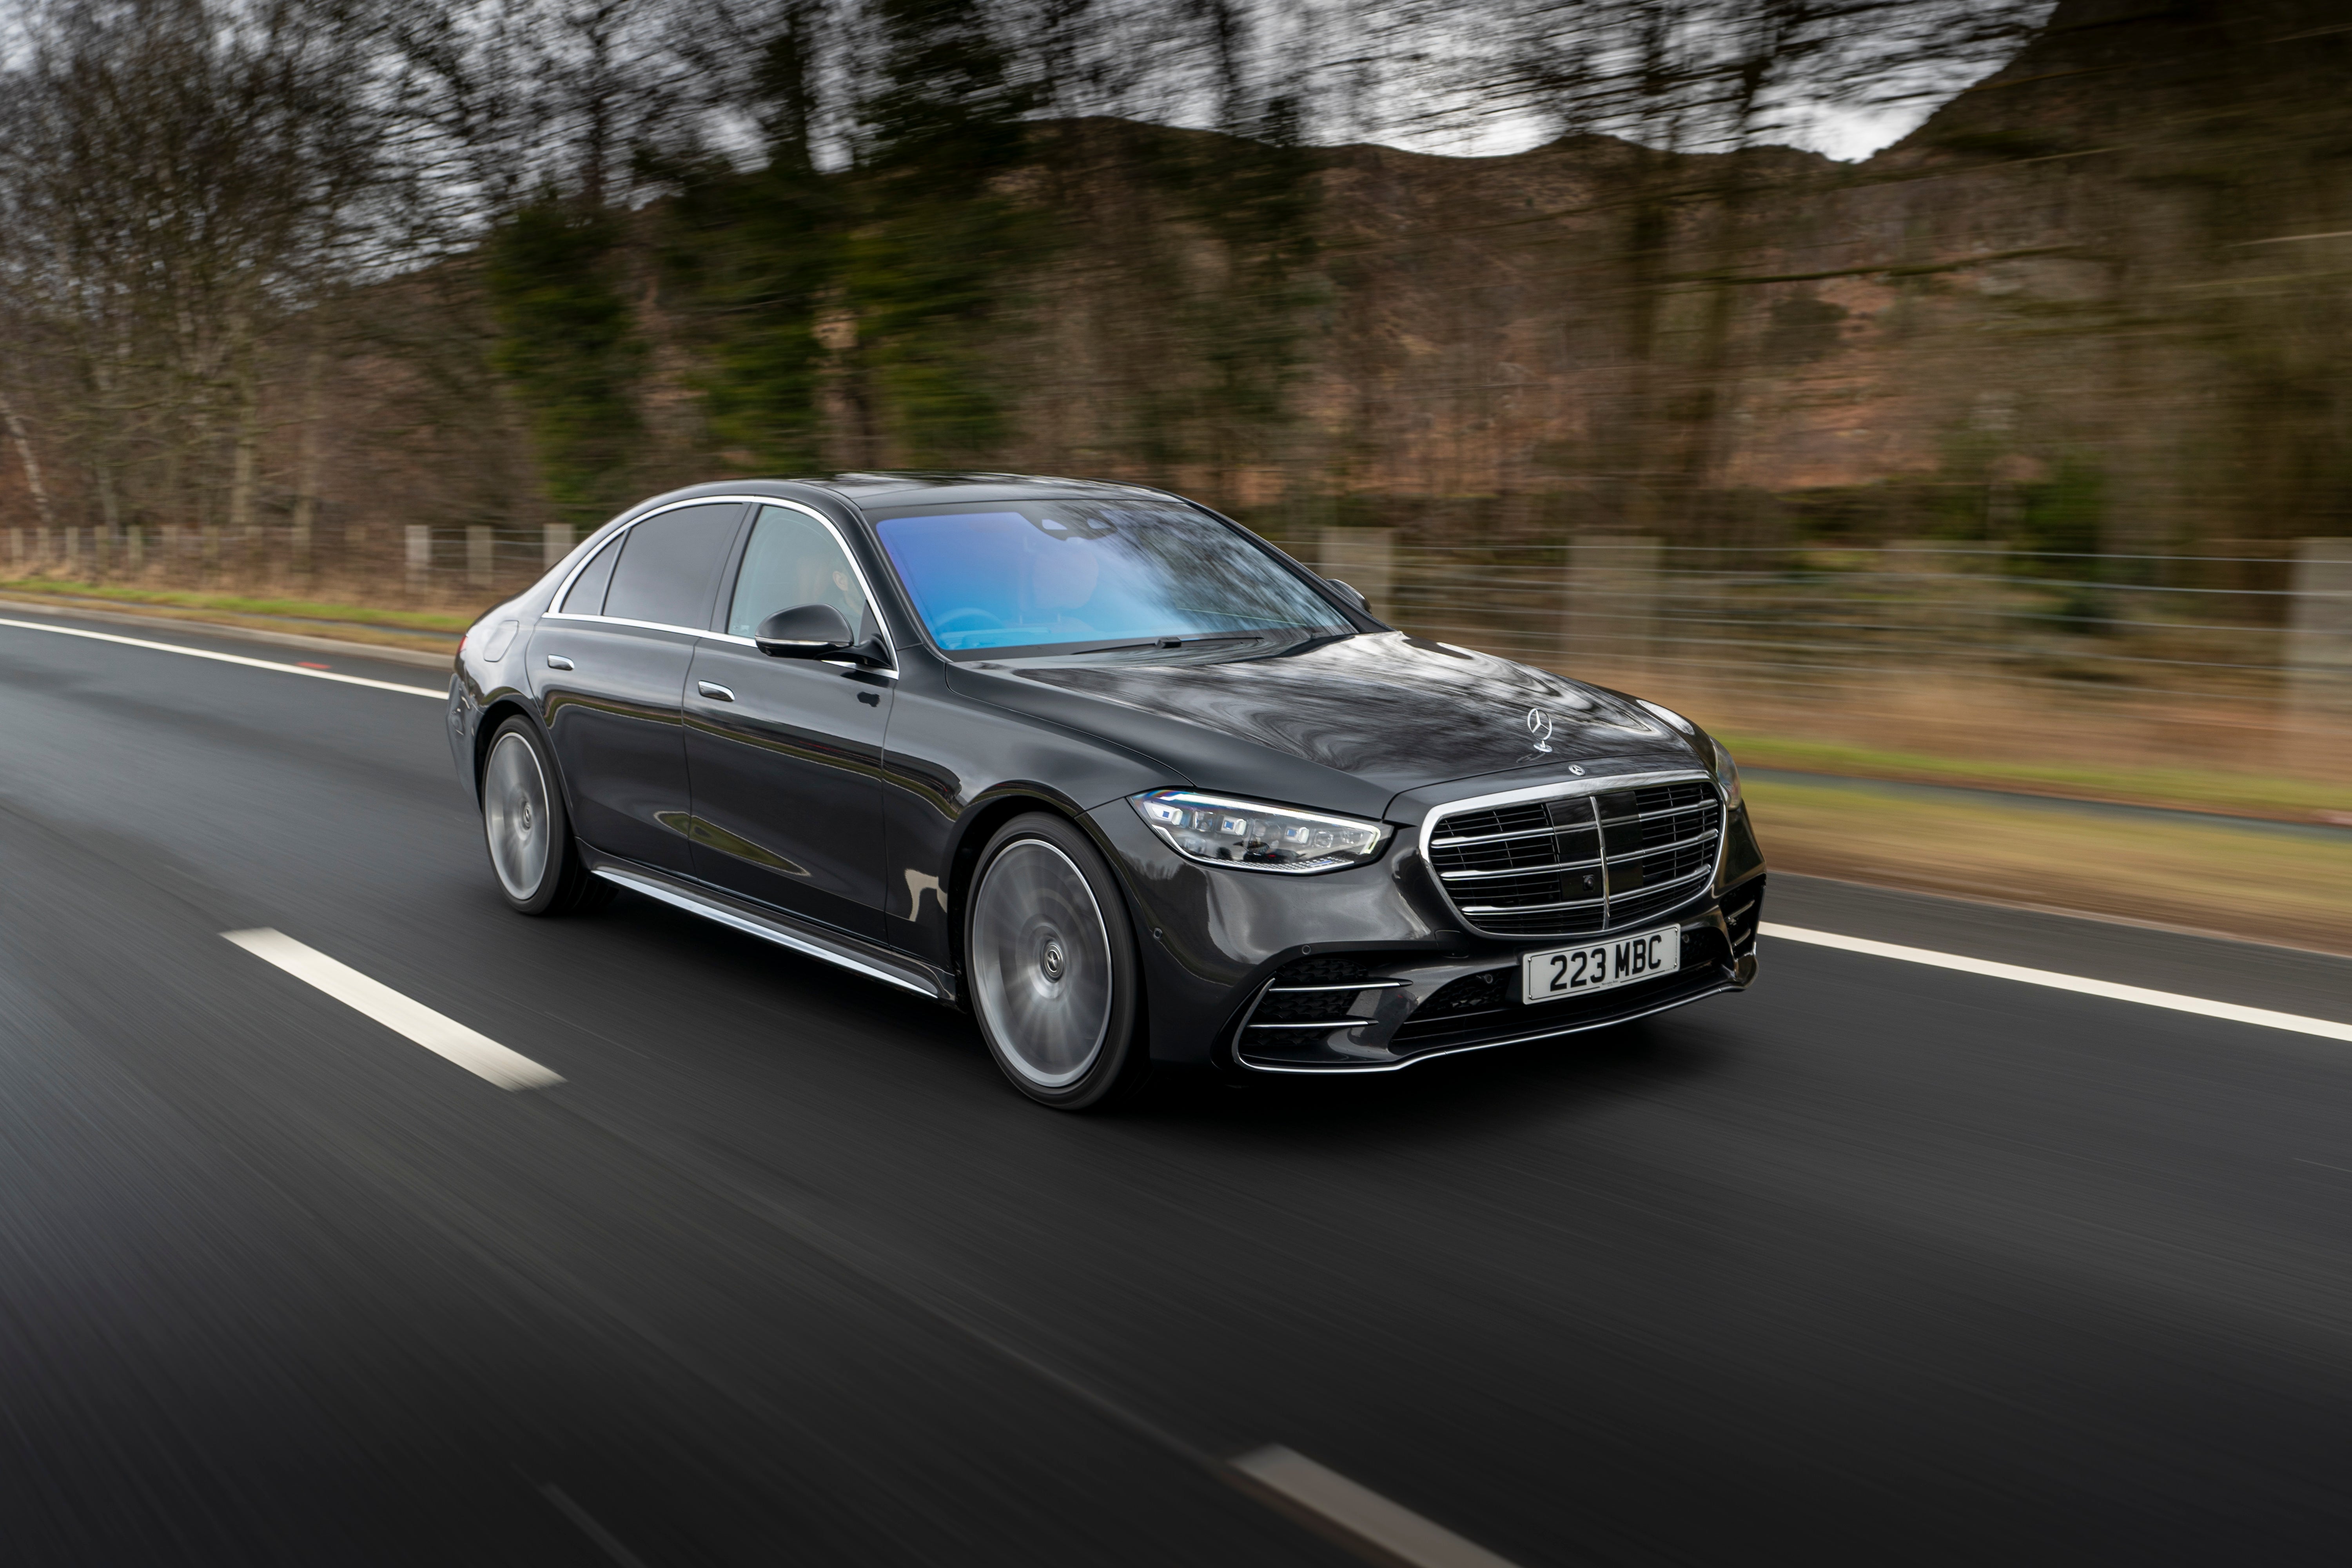 The S-Class saloon: still sombre and serious, but with a side-order of fun